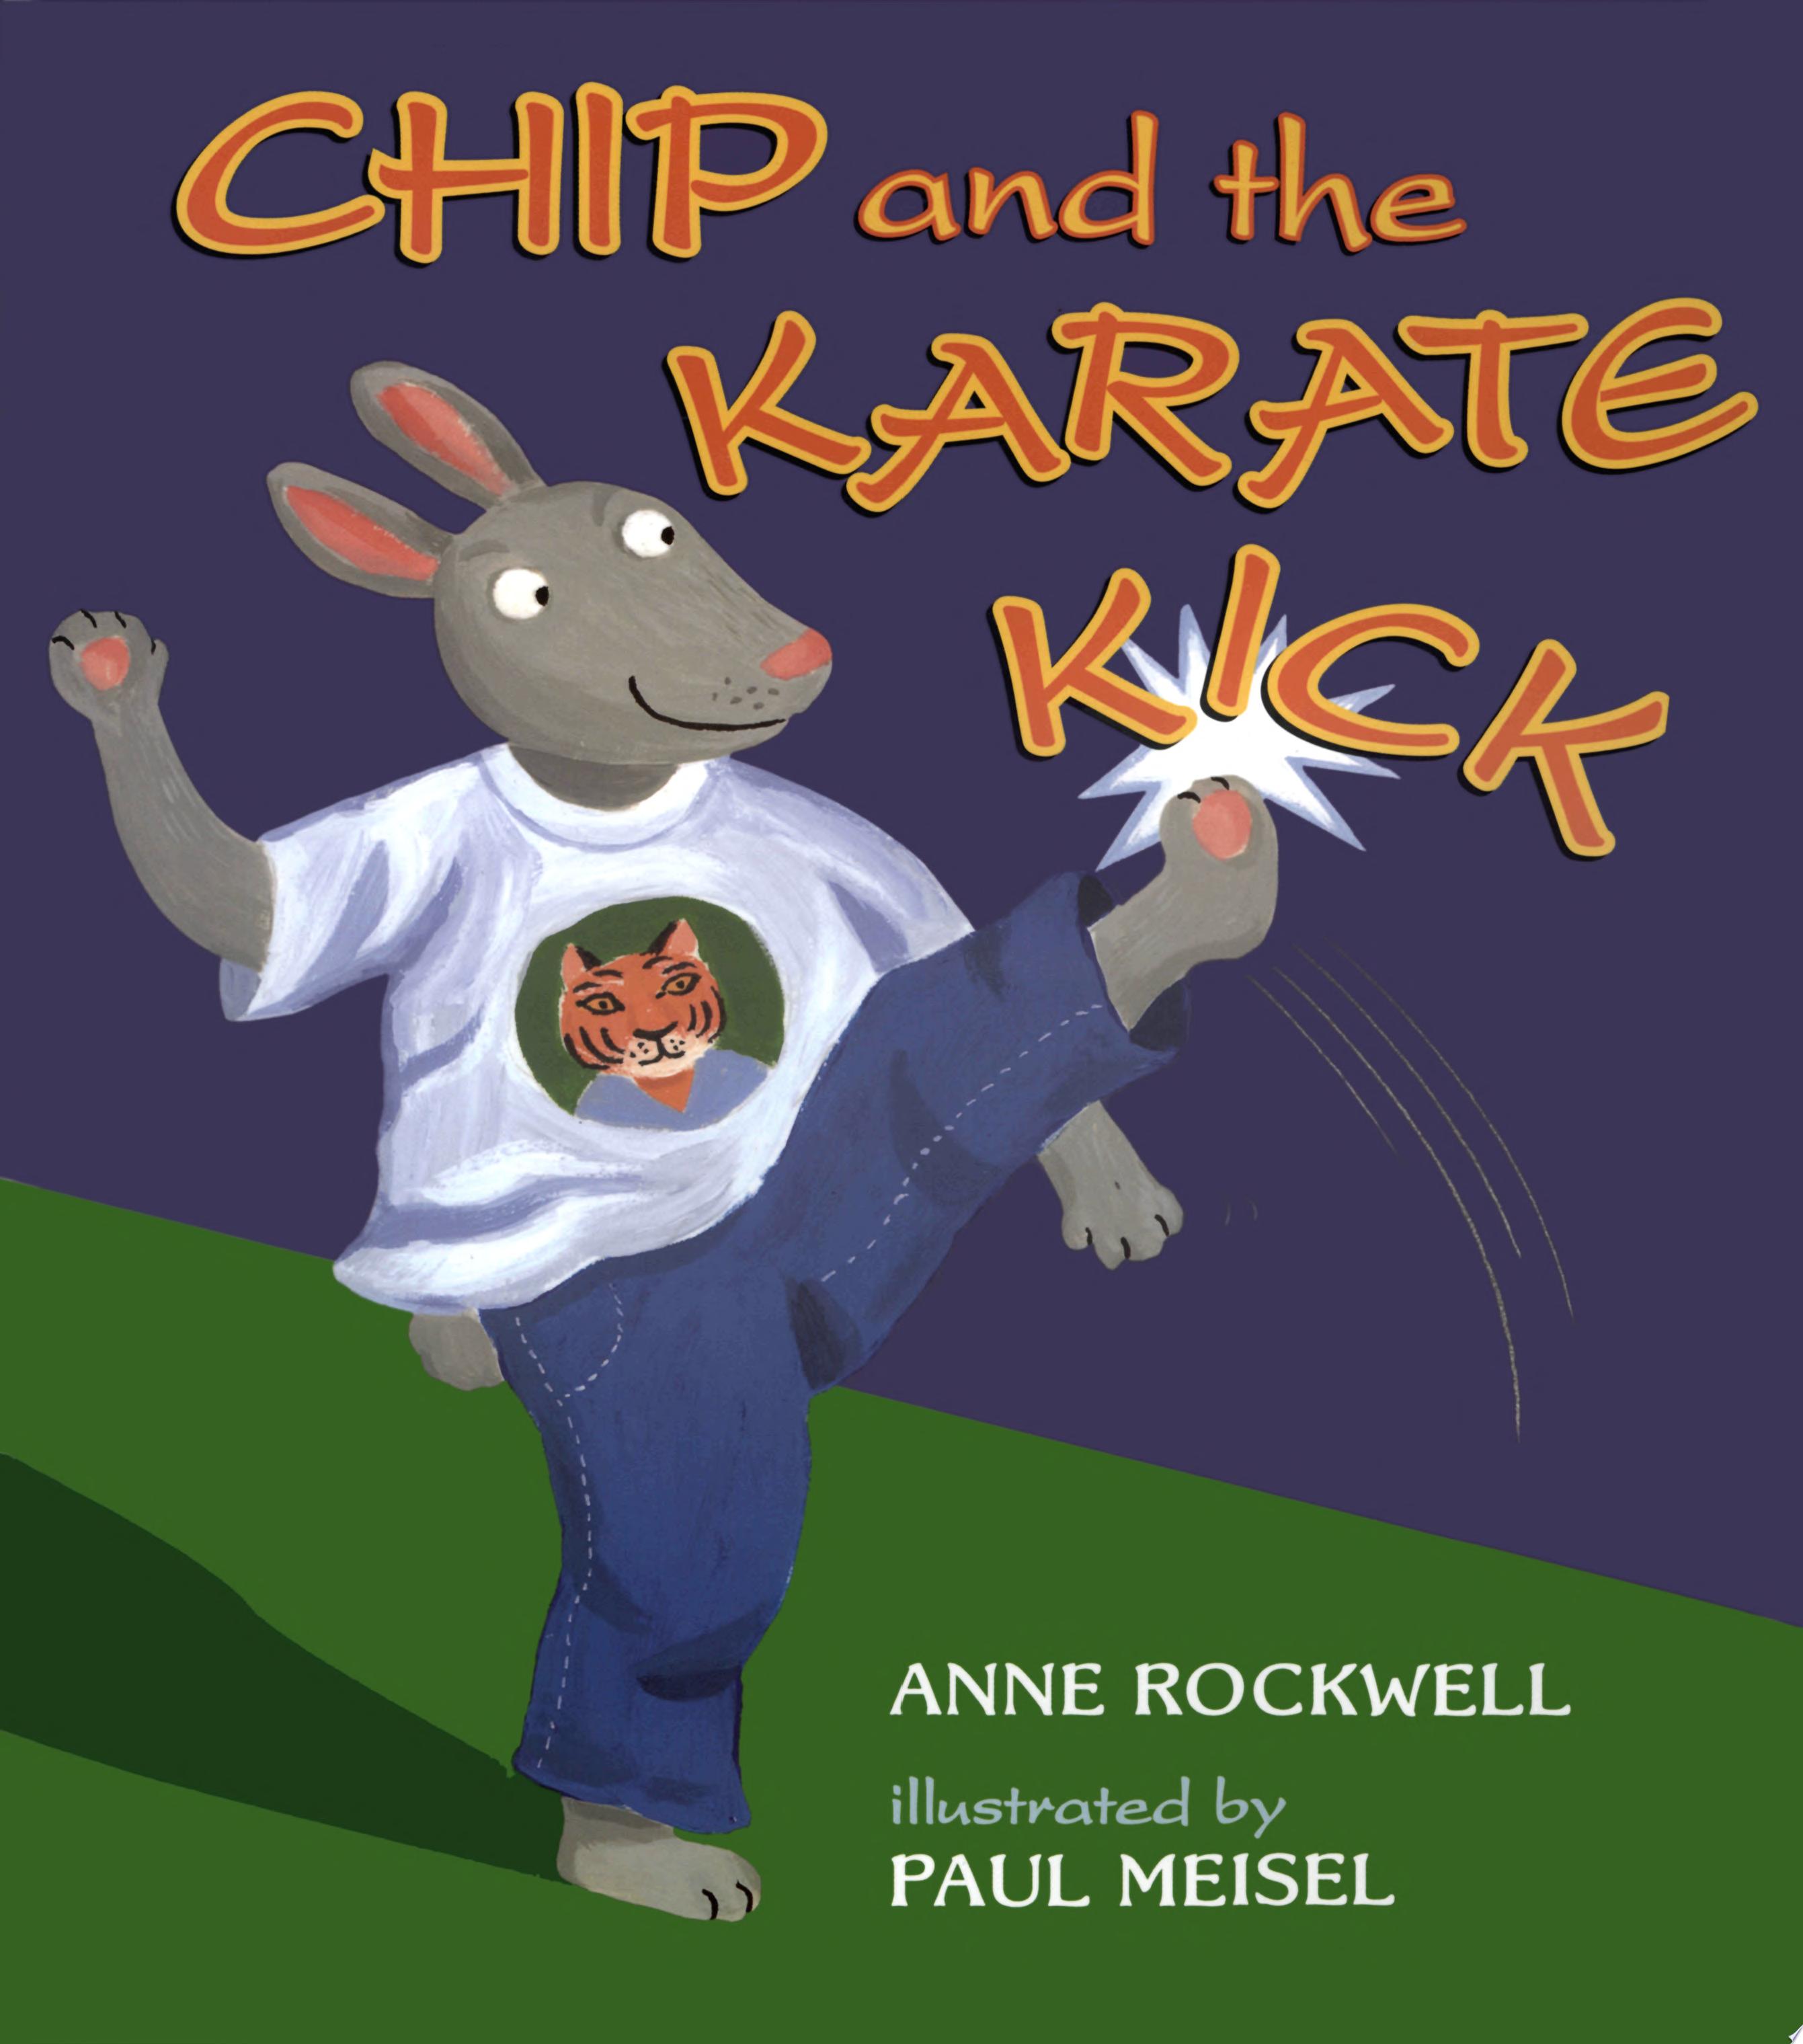 Image for "Chip and the Karate Kick"